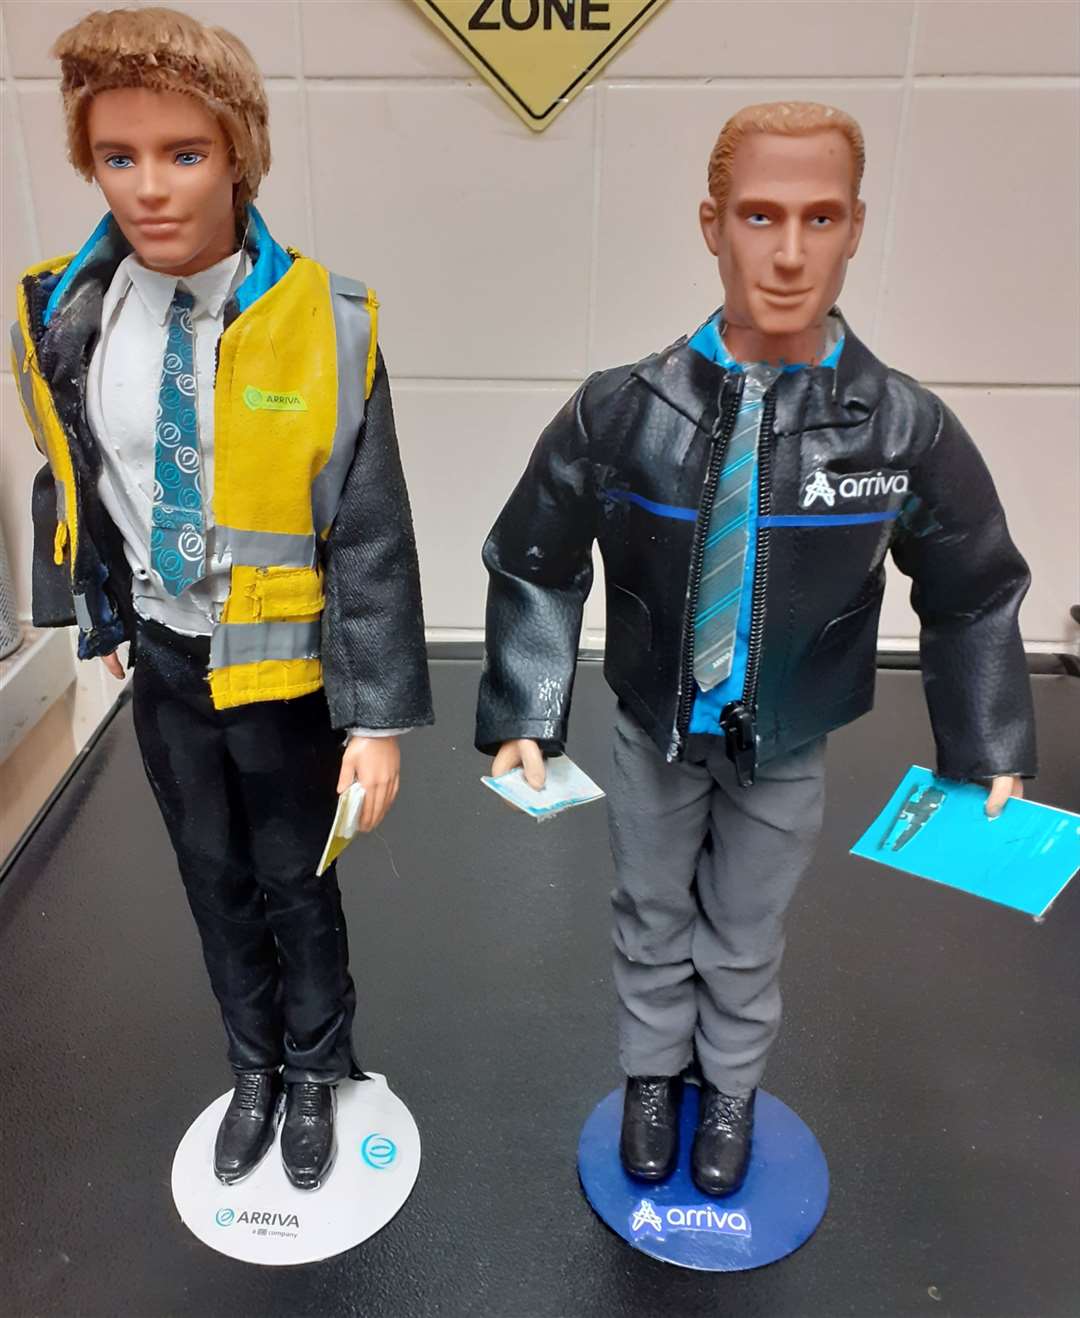 Action figures of Arriva staff made by Mr Baillie. Picture: Garry Baillie